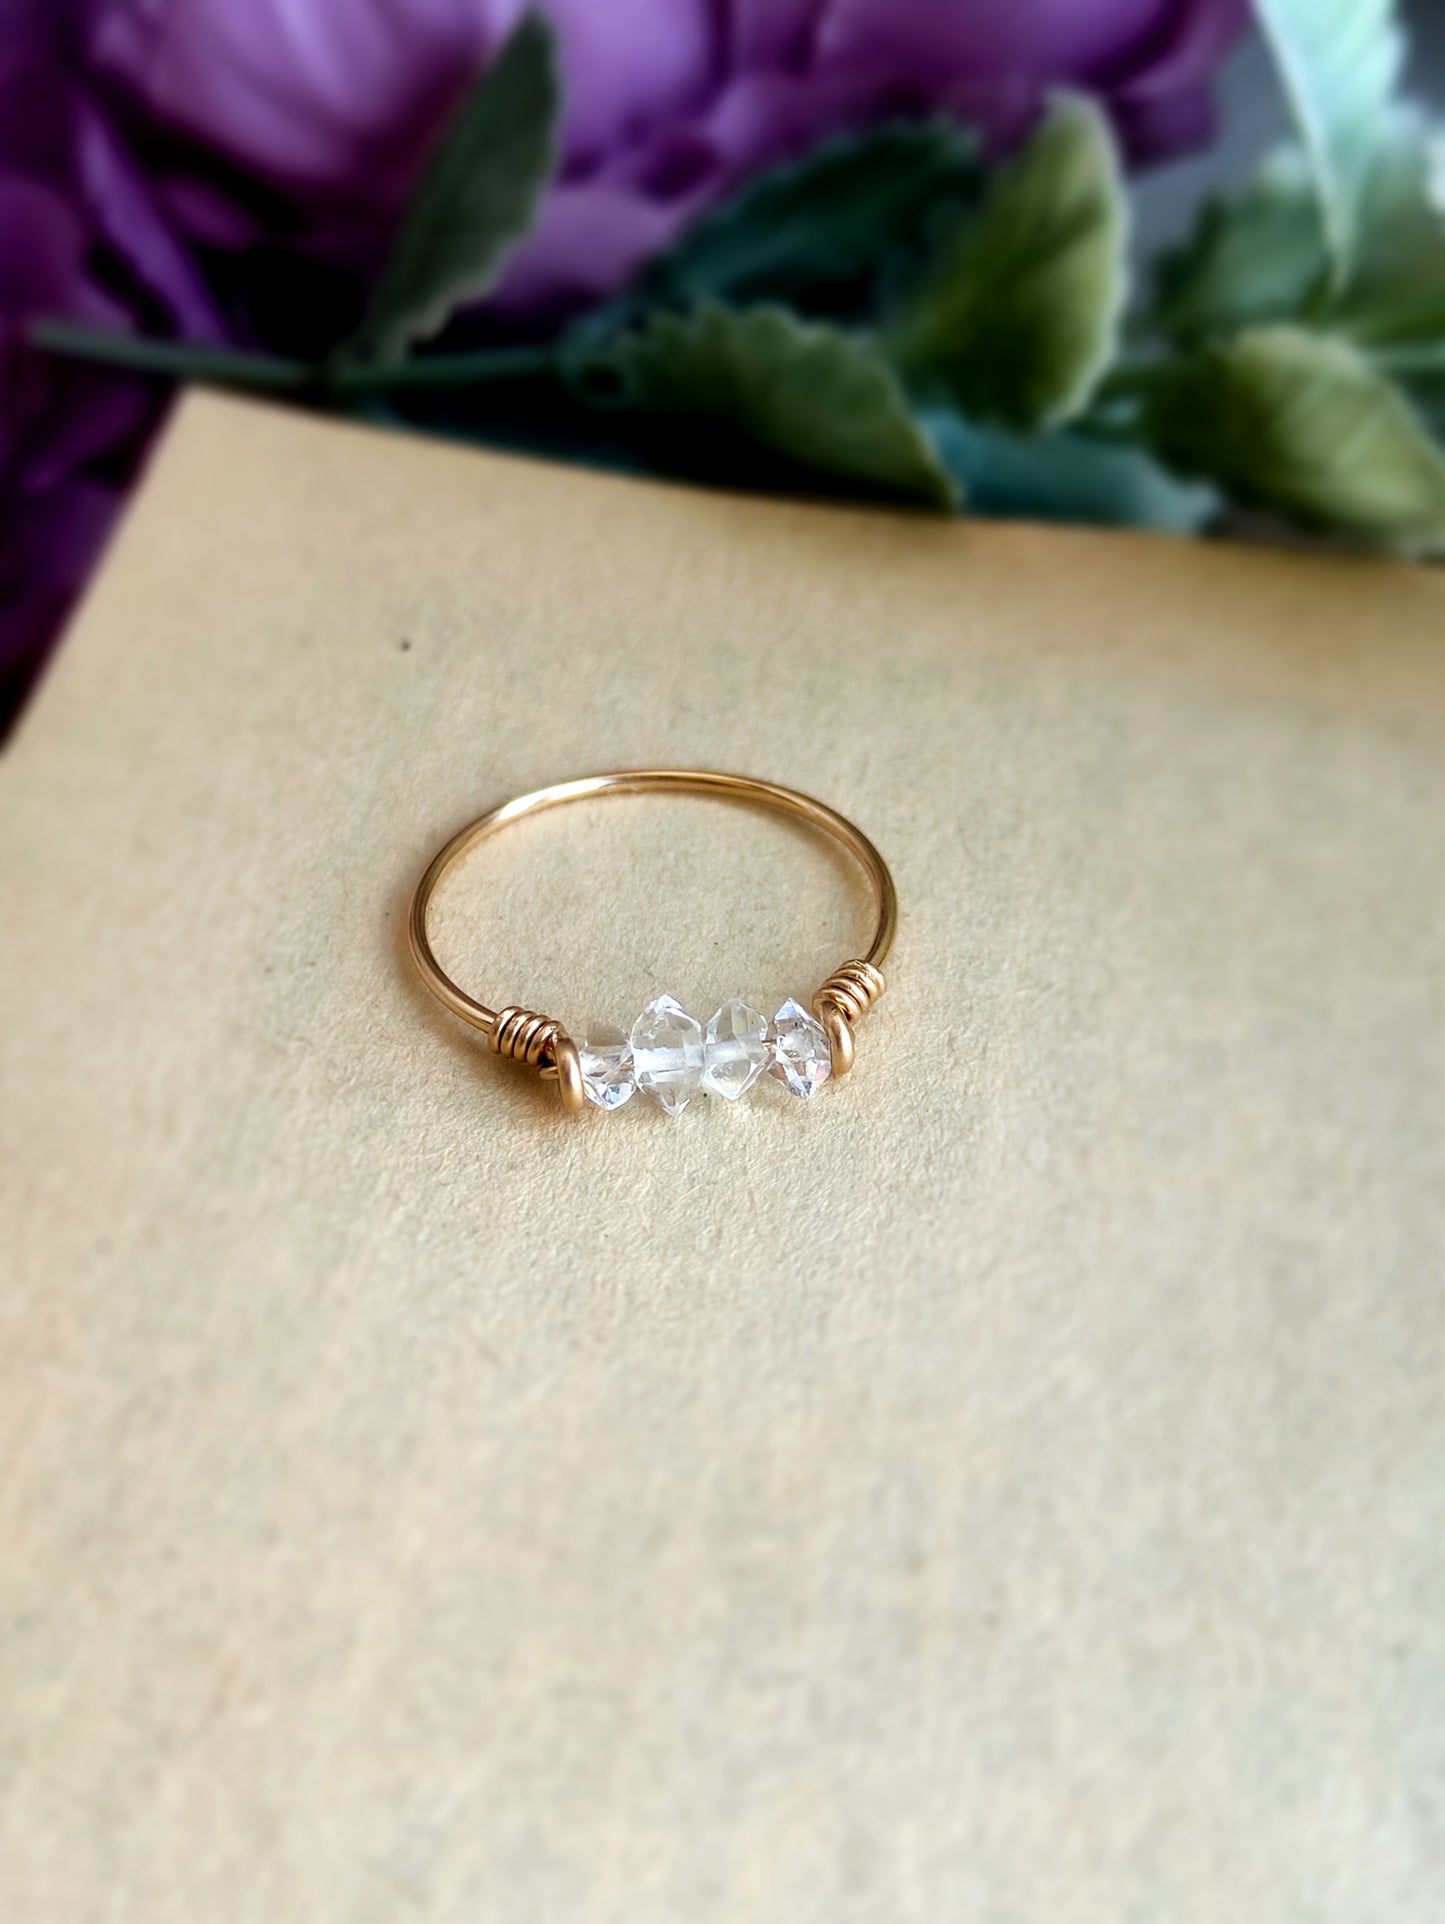 Dainty Raw Herkimer Diamond Ring in 14K Gold Filled